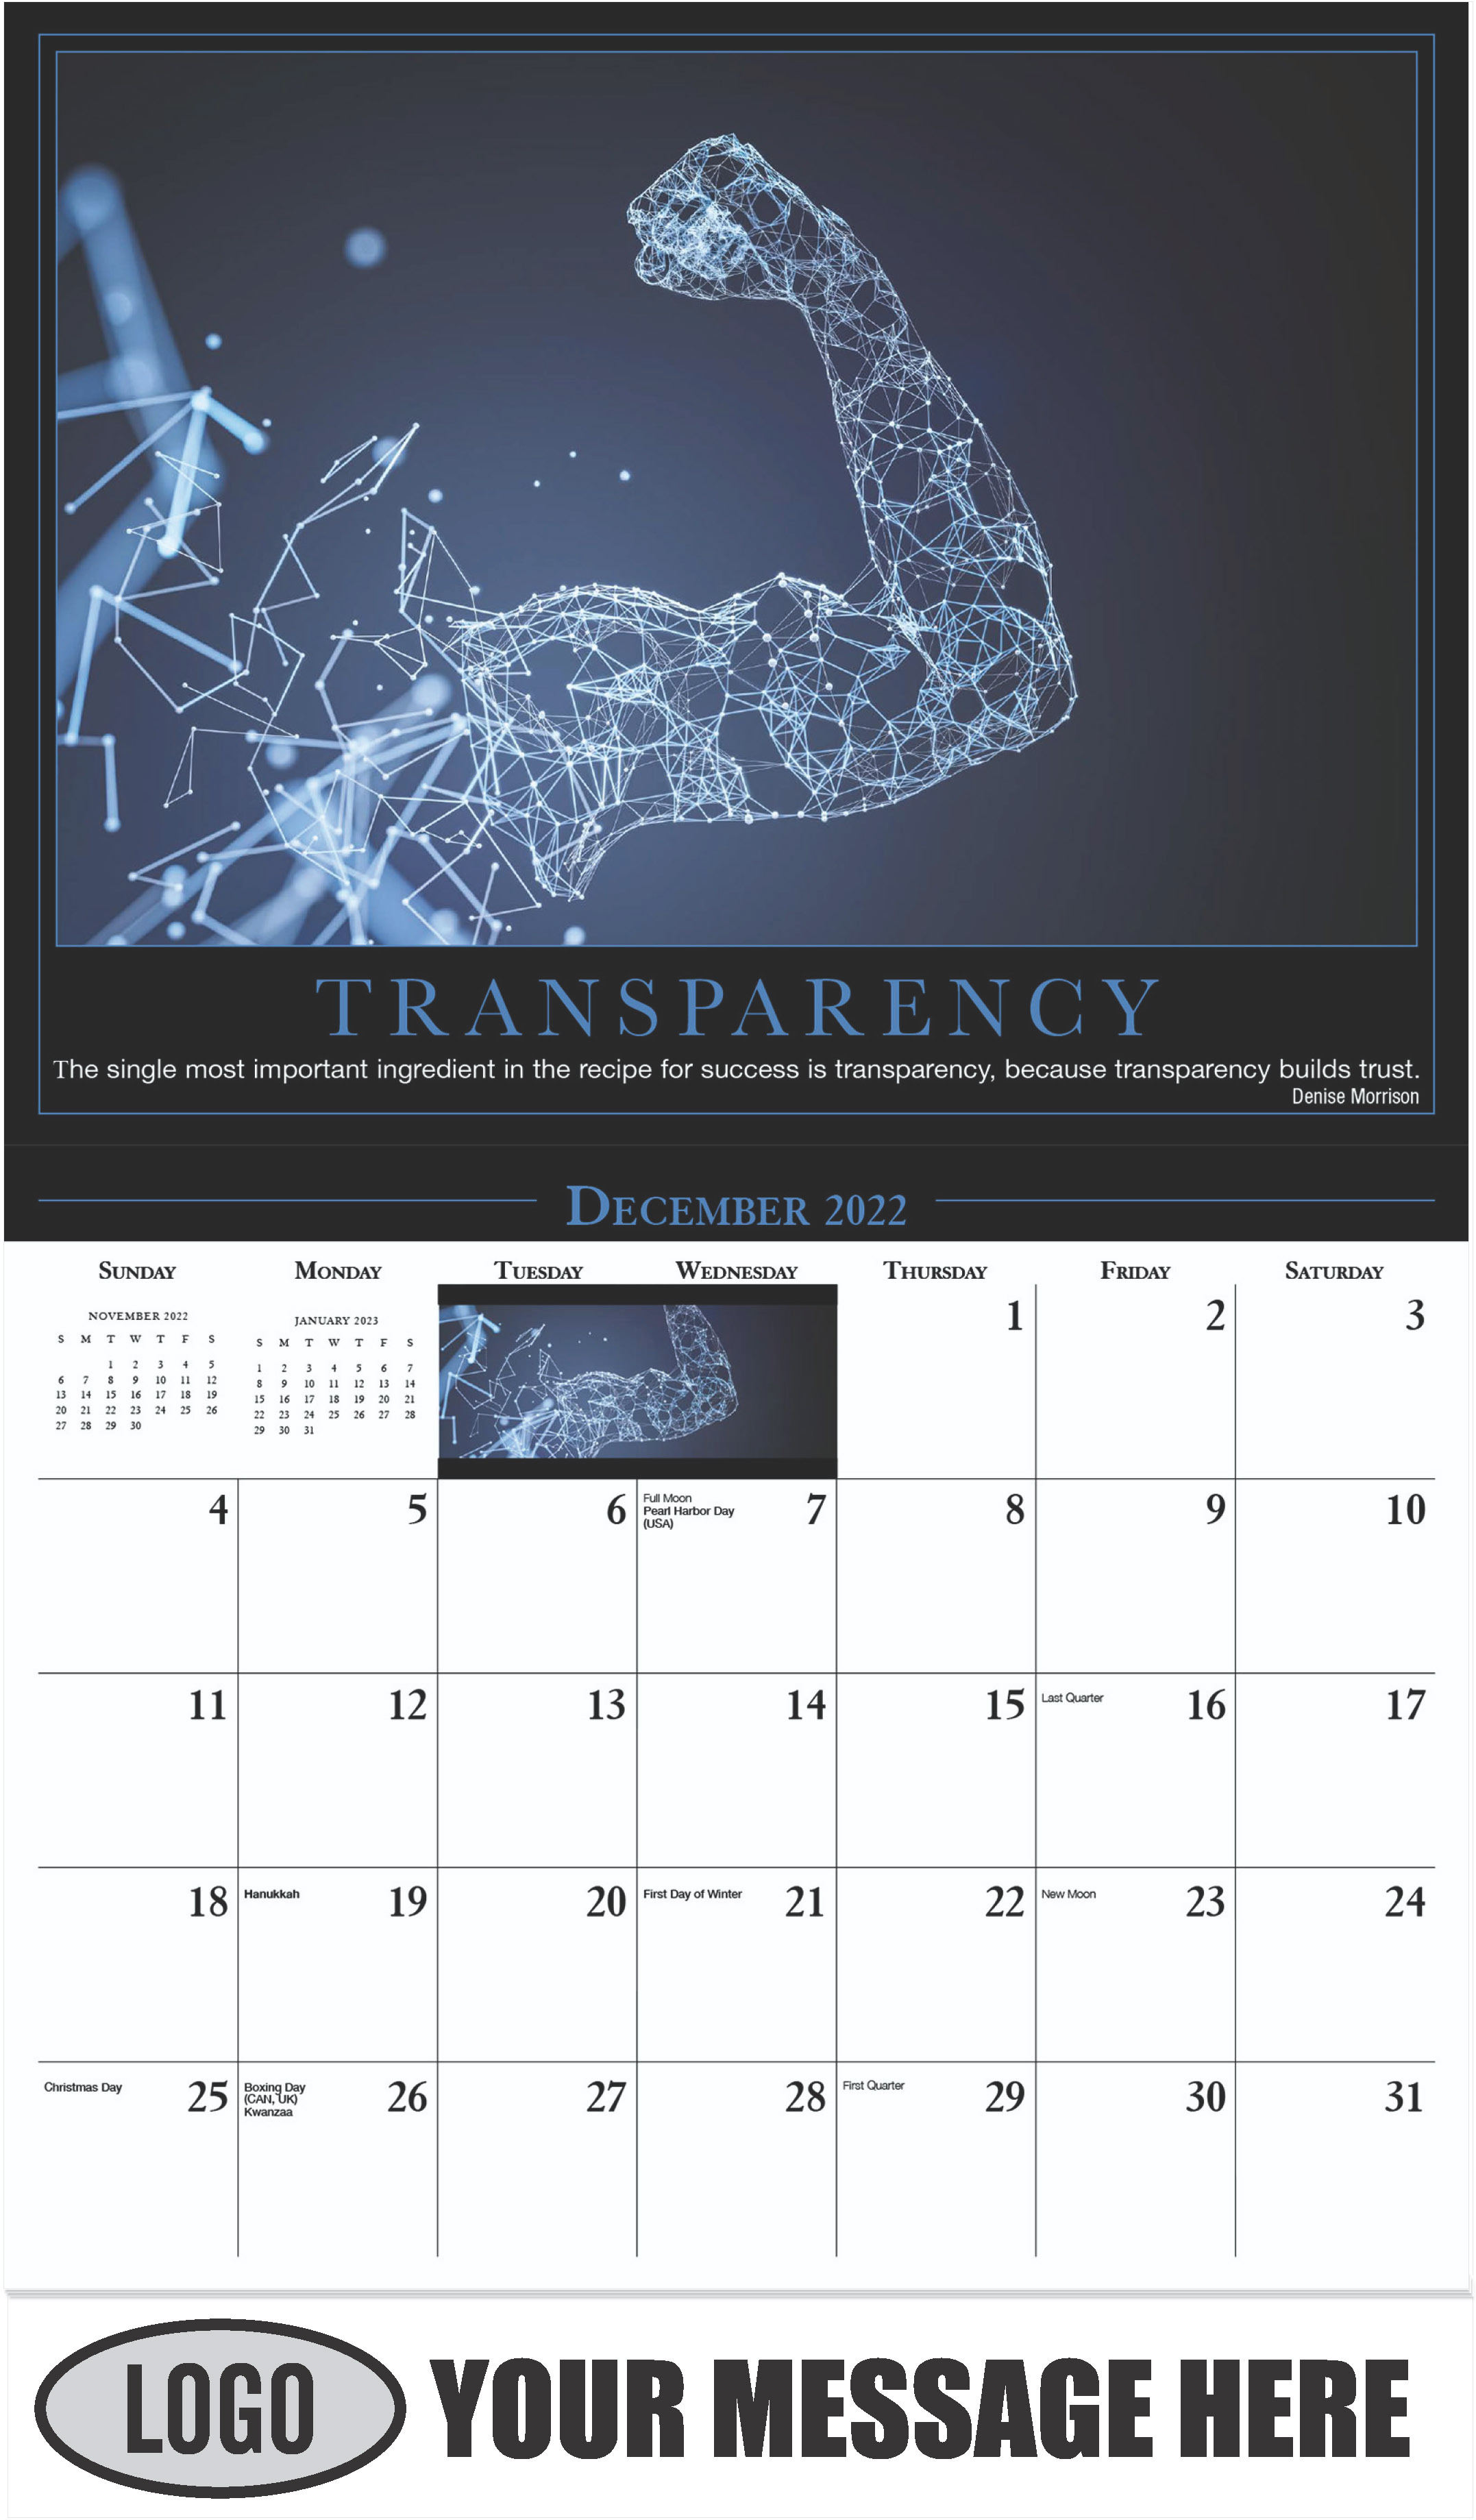 TRANSPARENCY ''The single most important ingredient in the recipe for success is transparency, because transparency builds trust.'' – Denise Morrison - December 2022 - Motivation 2023 Promotional Calendar